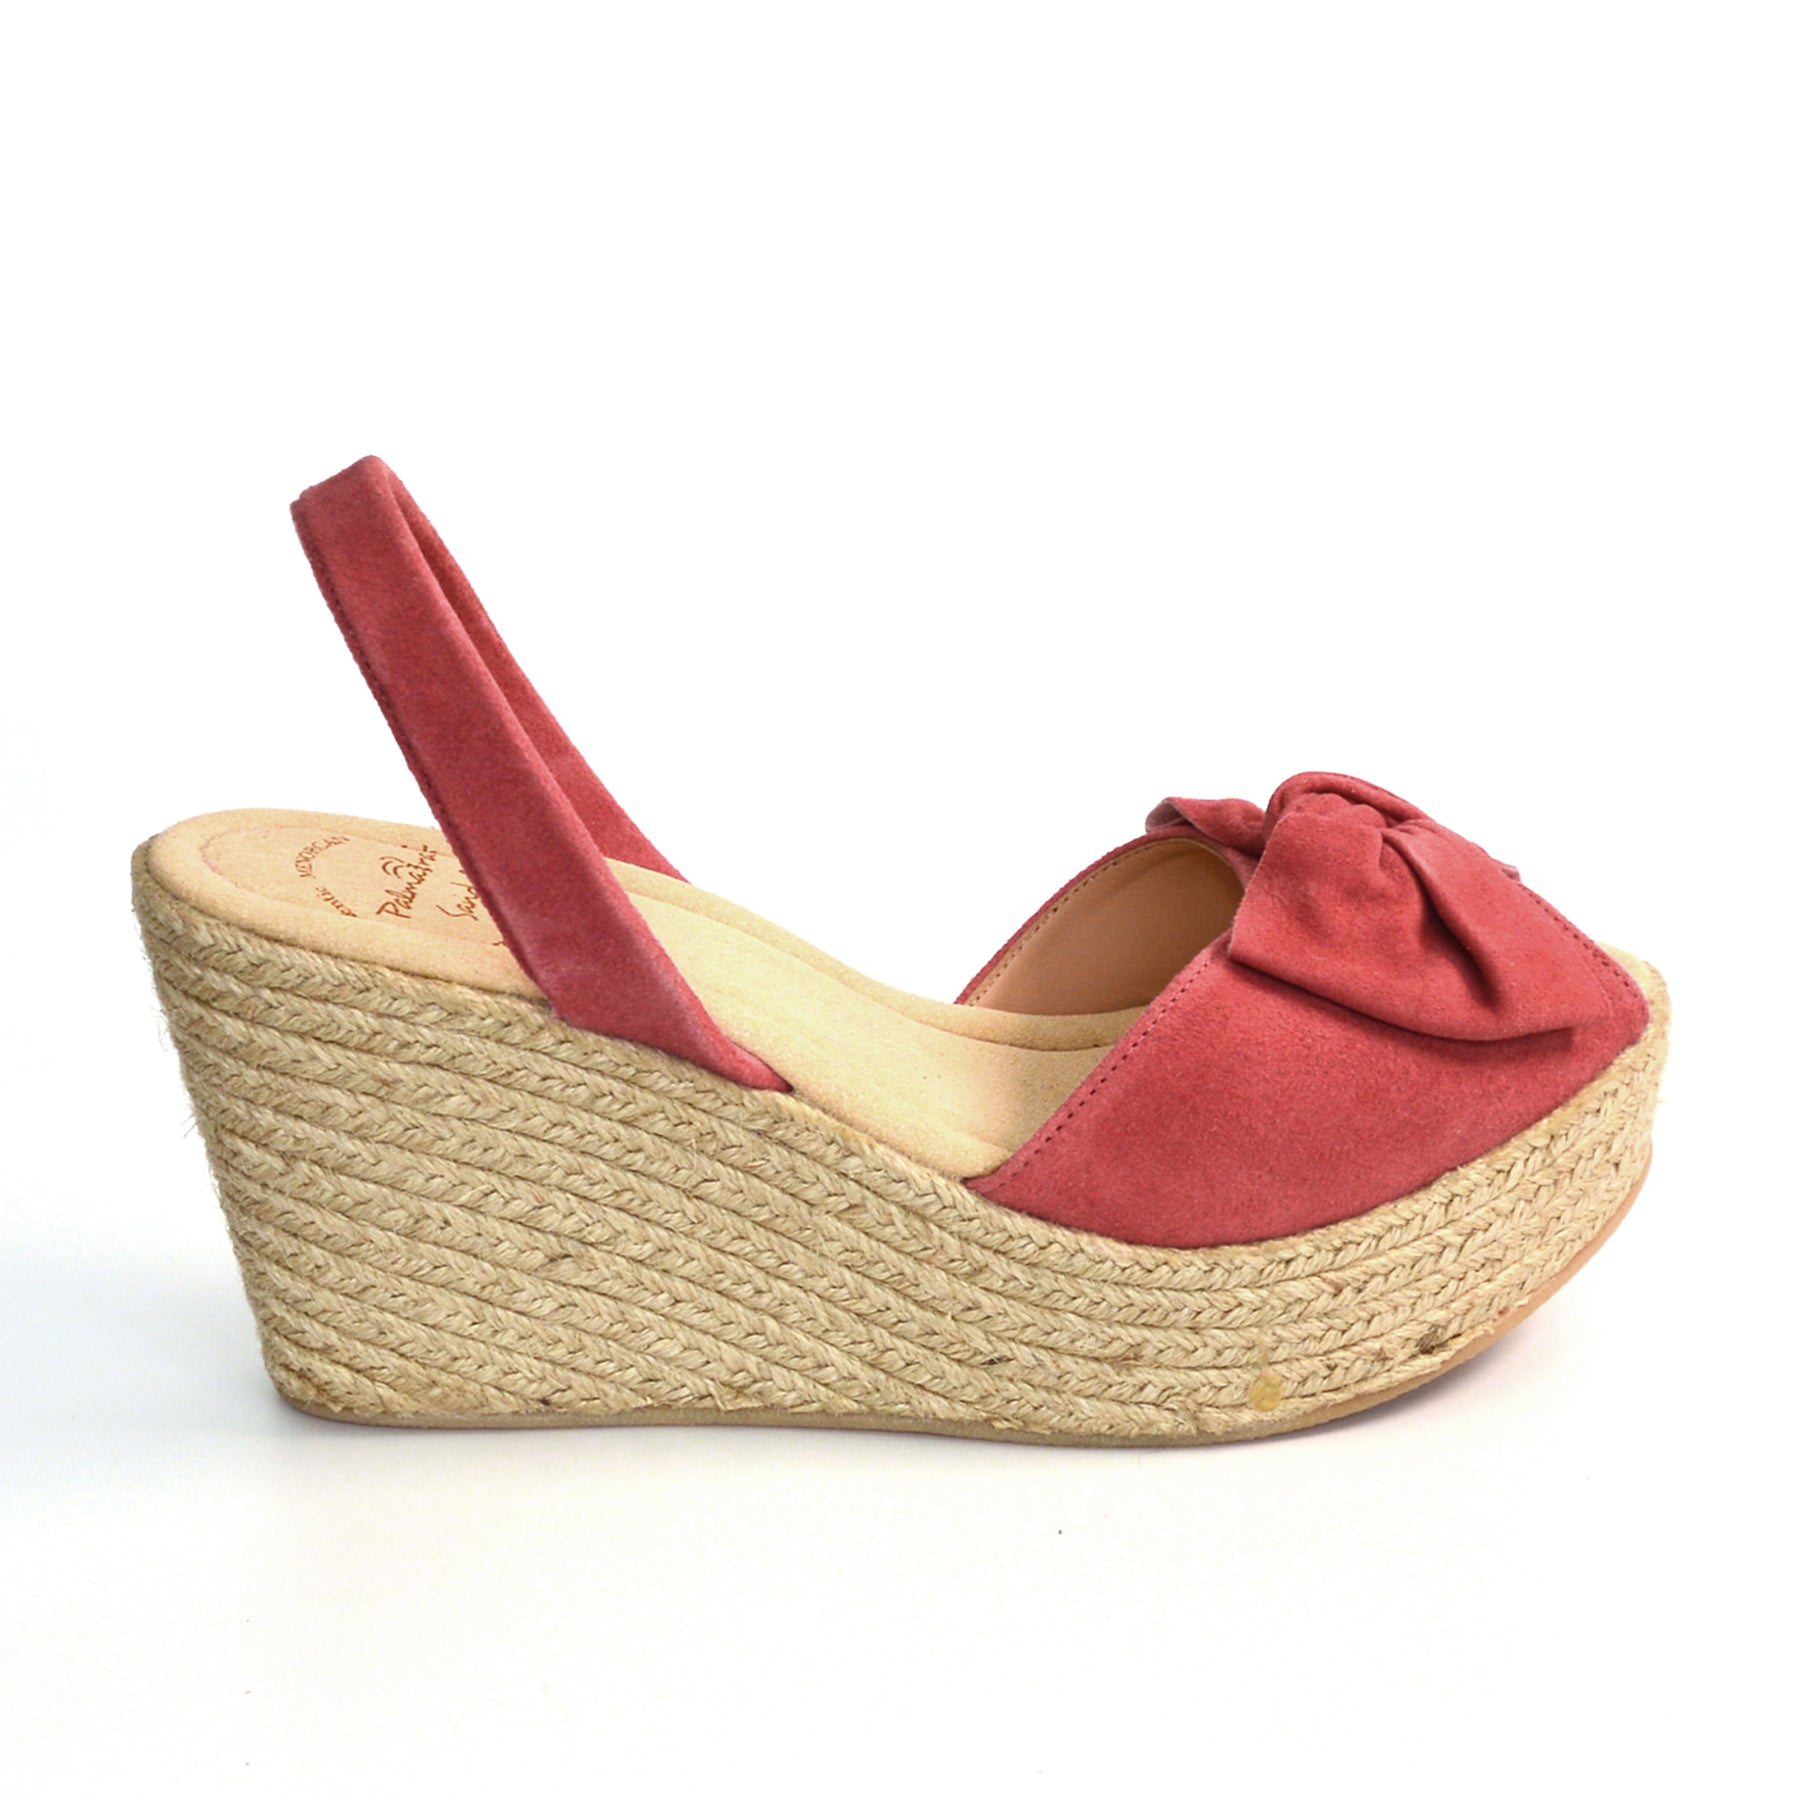 dusky pink suede leather with bow embellishment high espadrille wedge avarca sandals